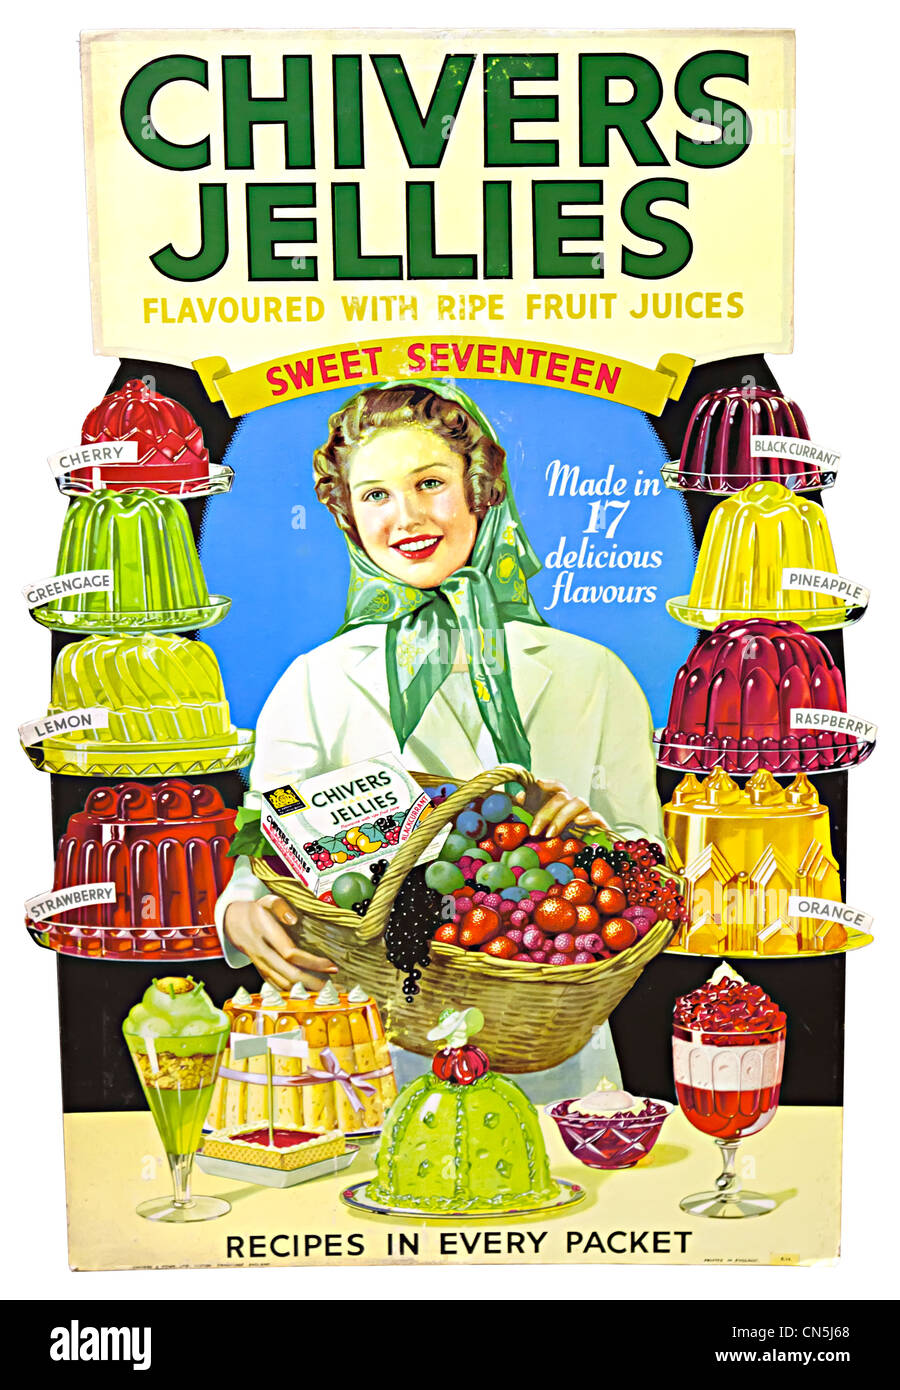 Chivers Jellies 1920s to 1930s advertising cardboard cutout sign, UK Stock Photo